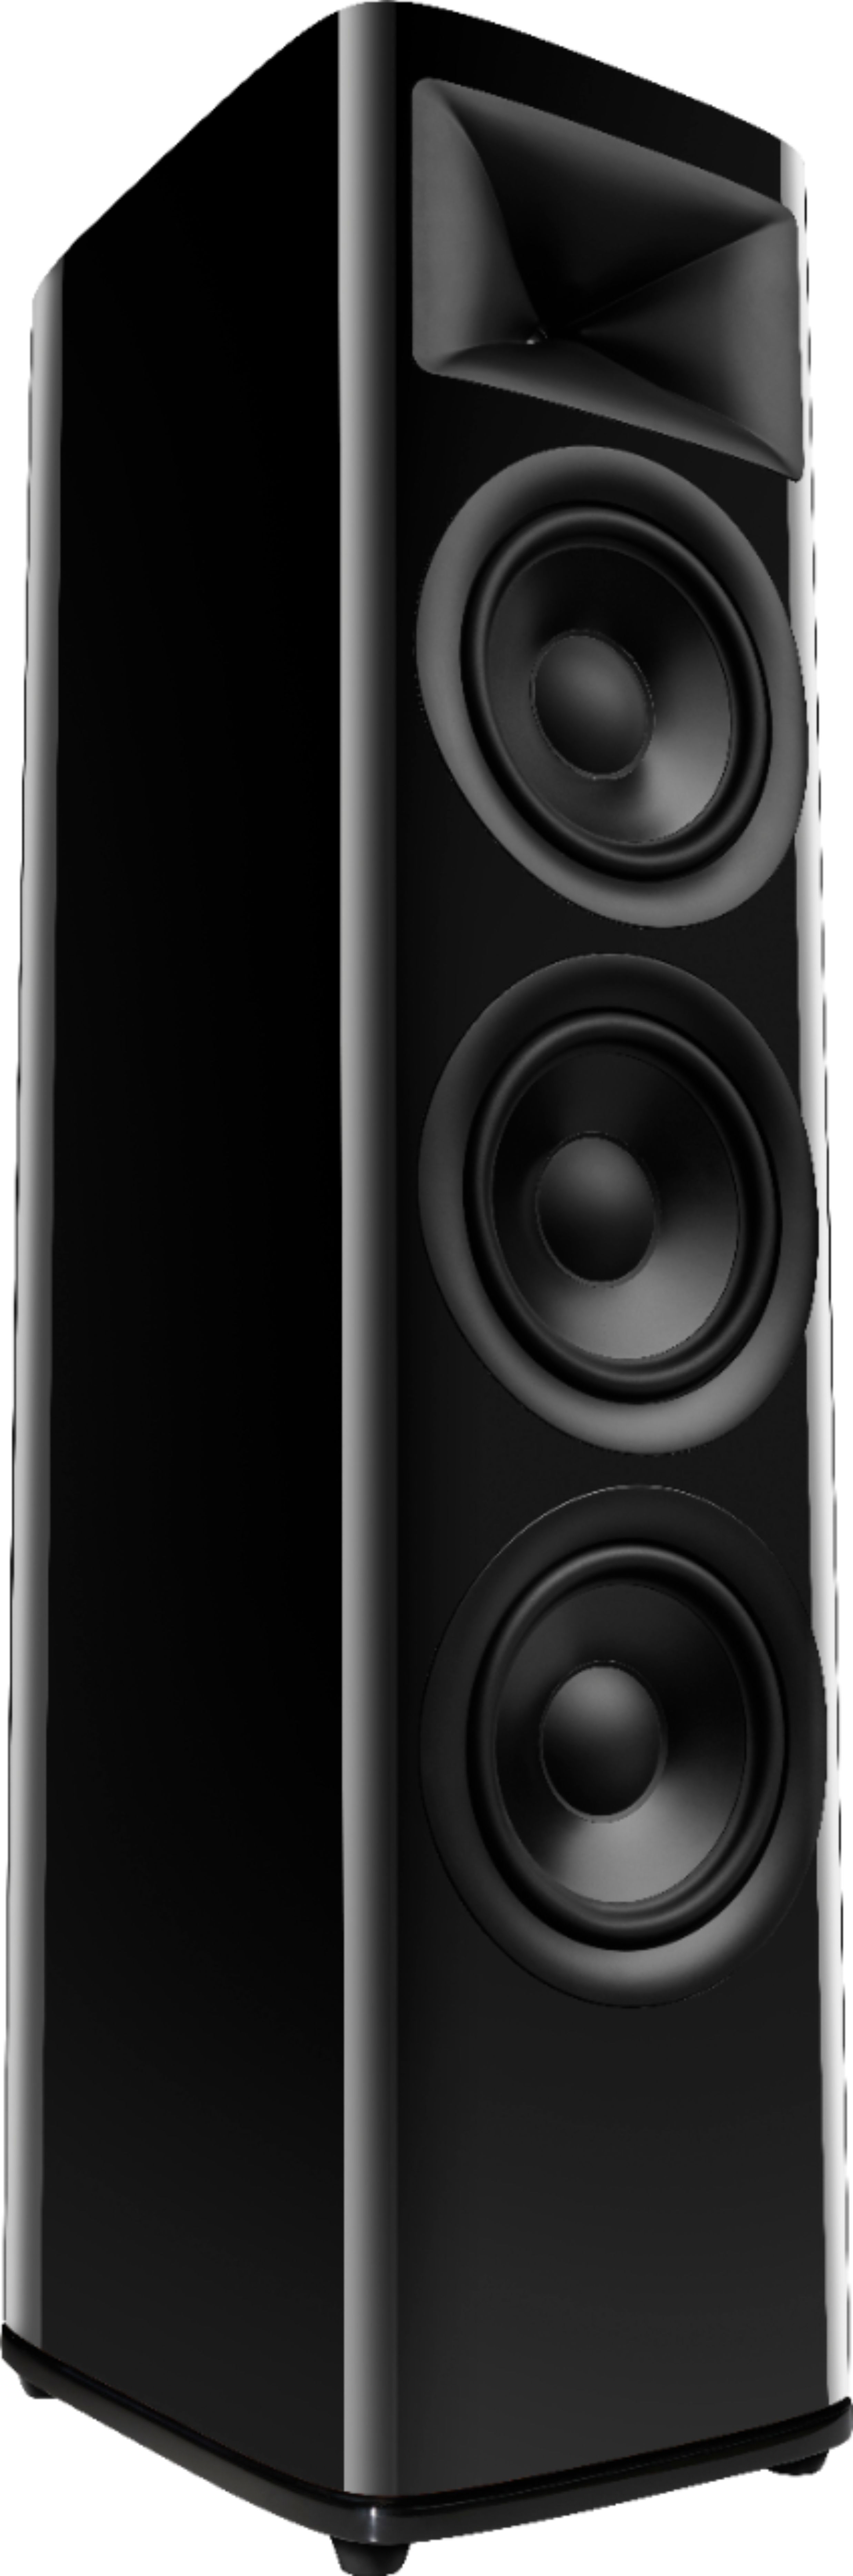 Angle View: JBL - HDI3800 Triple 8-inch 2-1/2 way Floorstanding Loudspeaker with 1" compression tweeter - Gloss Black Finish